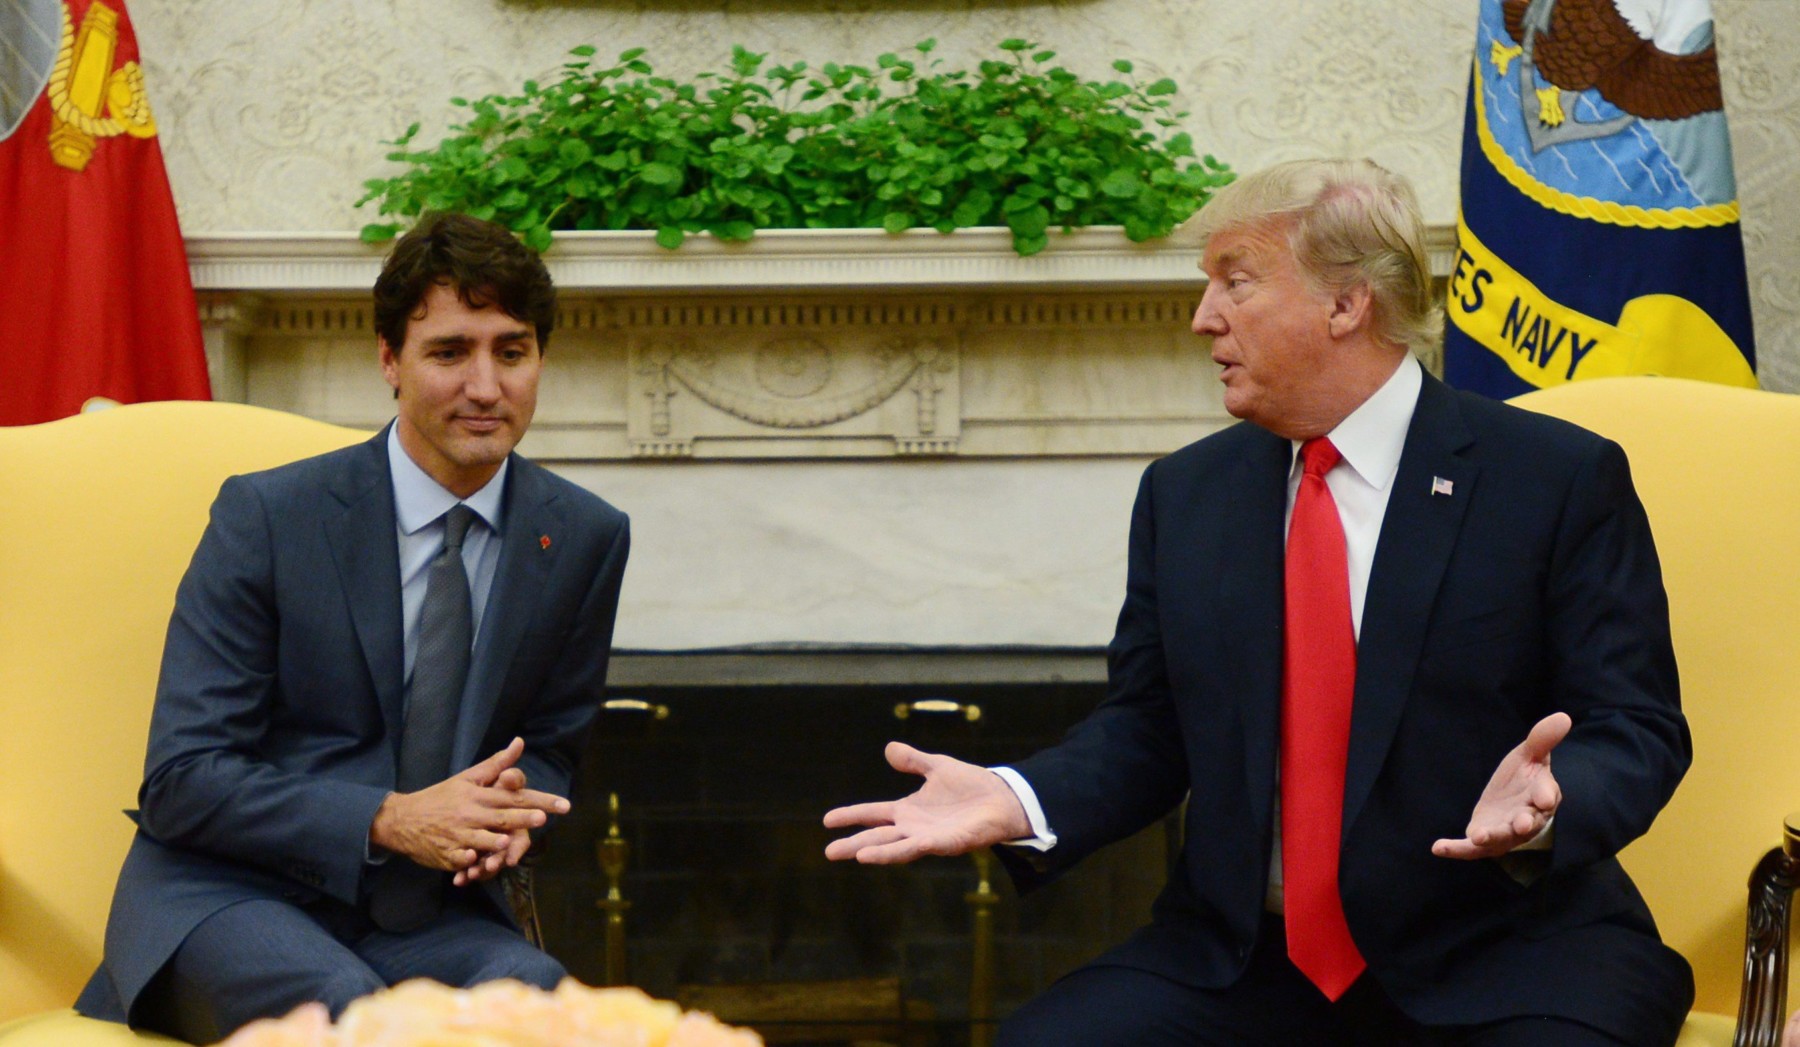 Canadian Prime Minister Justin Trudeau with US President Donald Trump. / Internet photo